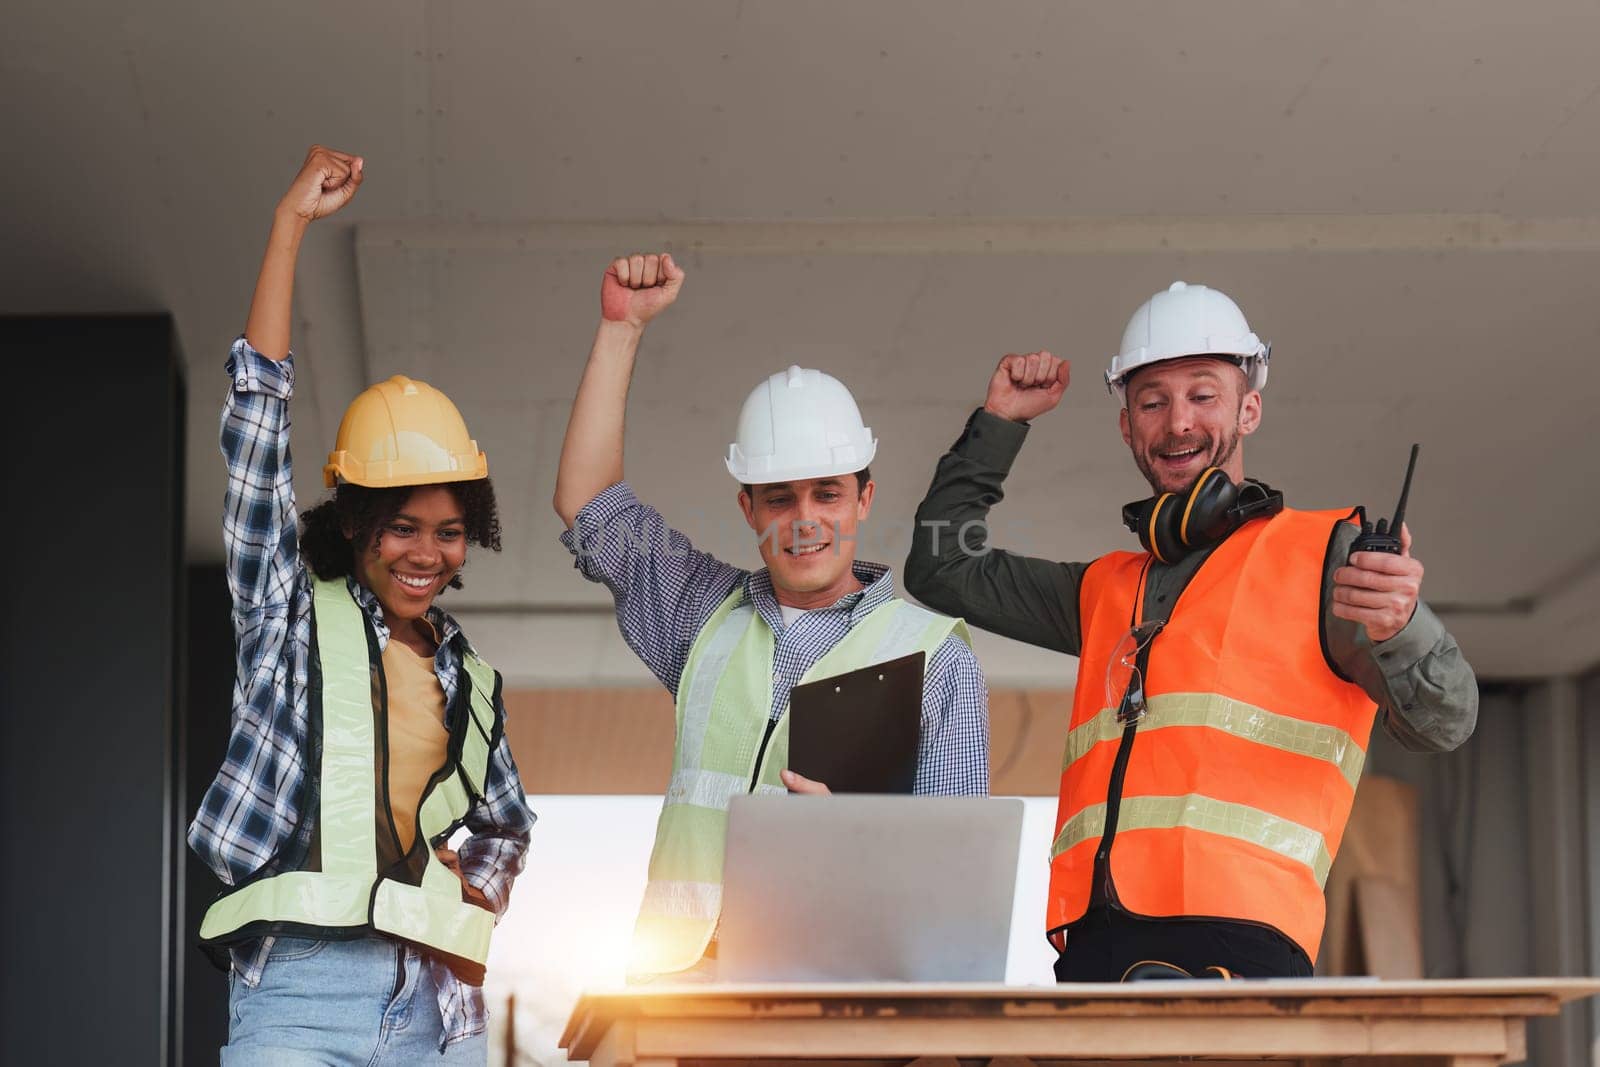 Engineer and Architecture and Foreman celebrate success at construction site. Industrial people and manufacturing labor concept.